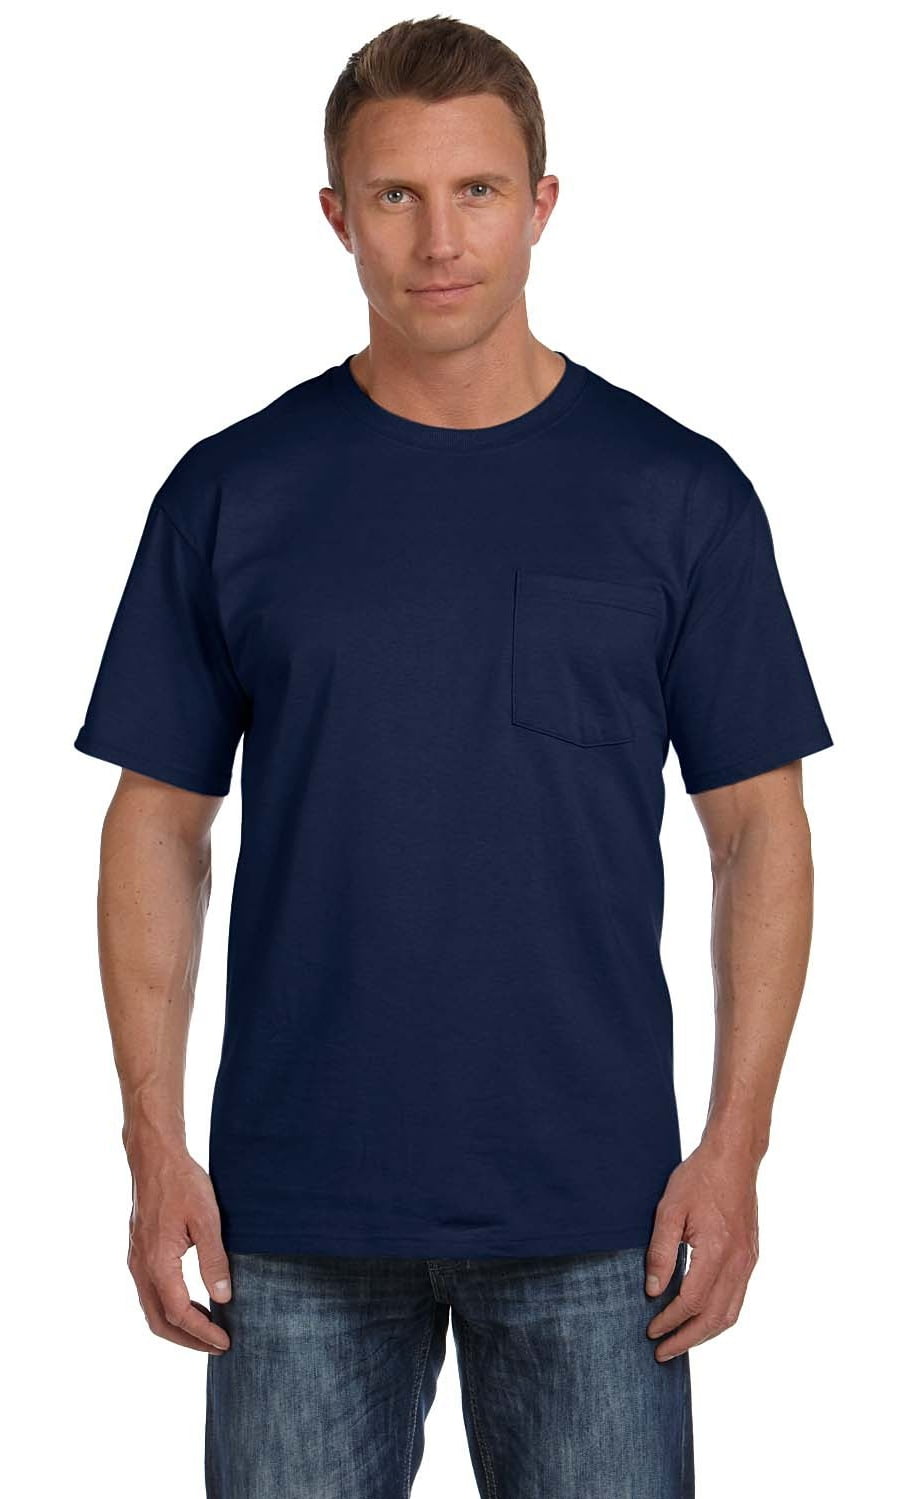 The Fruit of the Loom Adult 5 oz HD Cotton Pocket T-Shirt - J NAVY ...